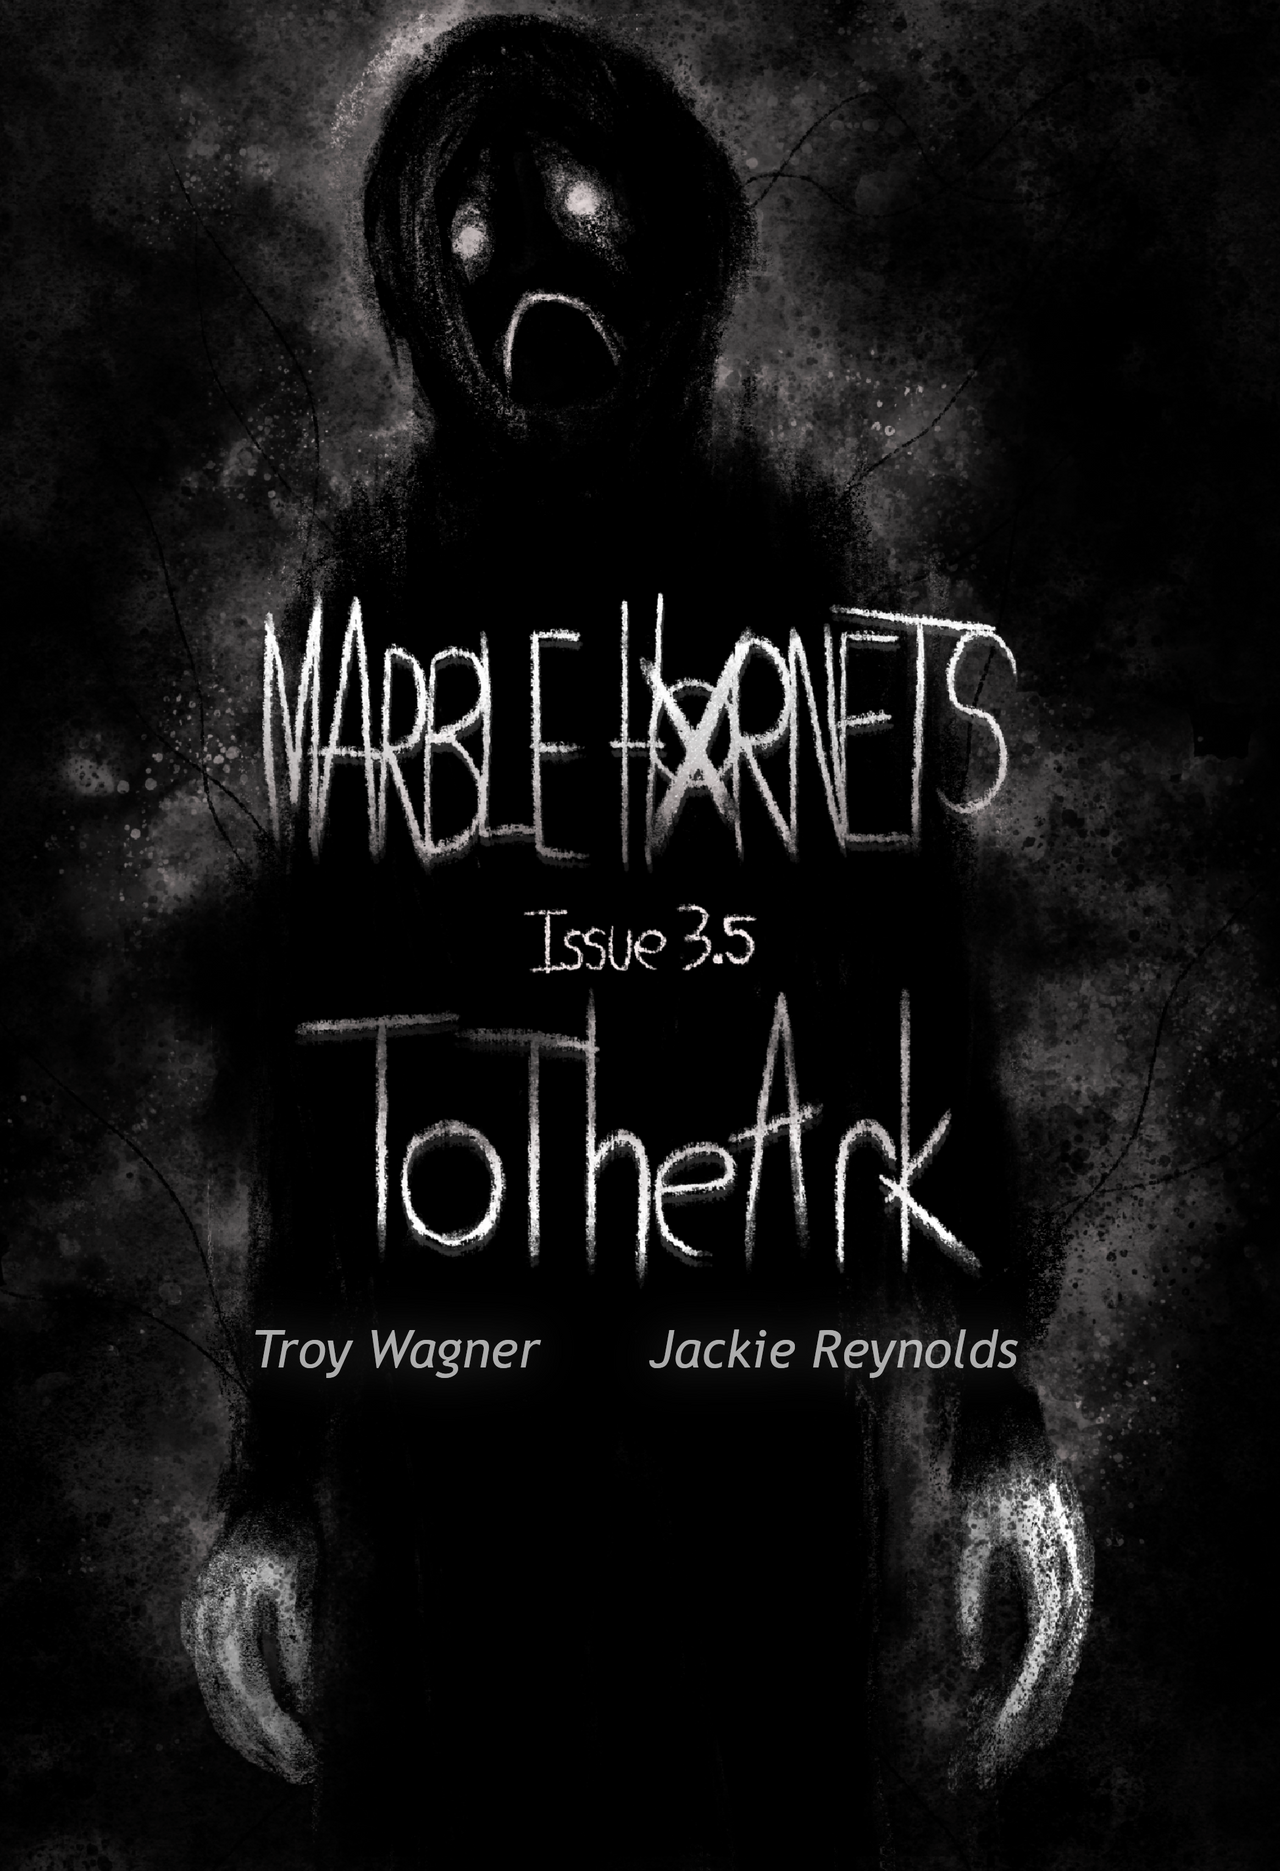 Print Edition - Marble Hornets Issue 3.5: ToTheArk